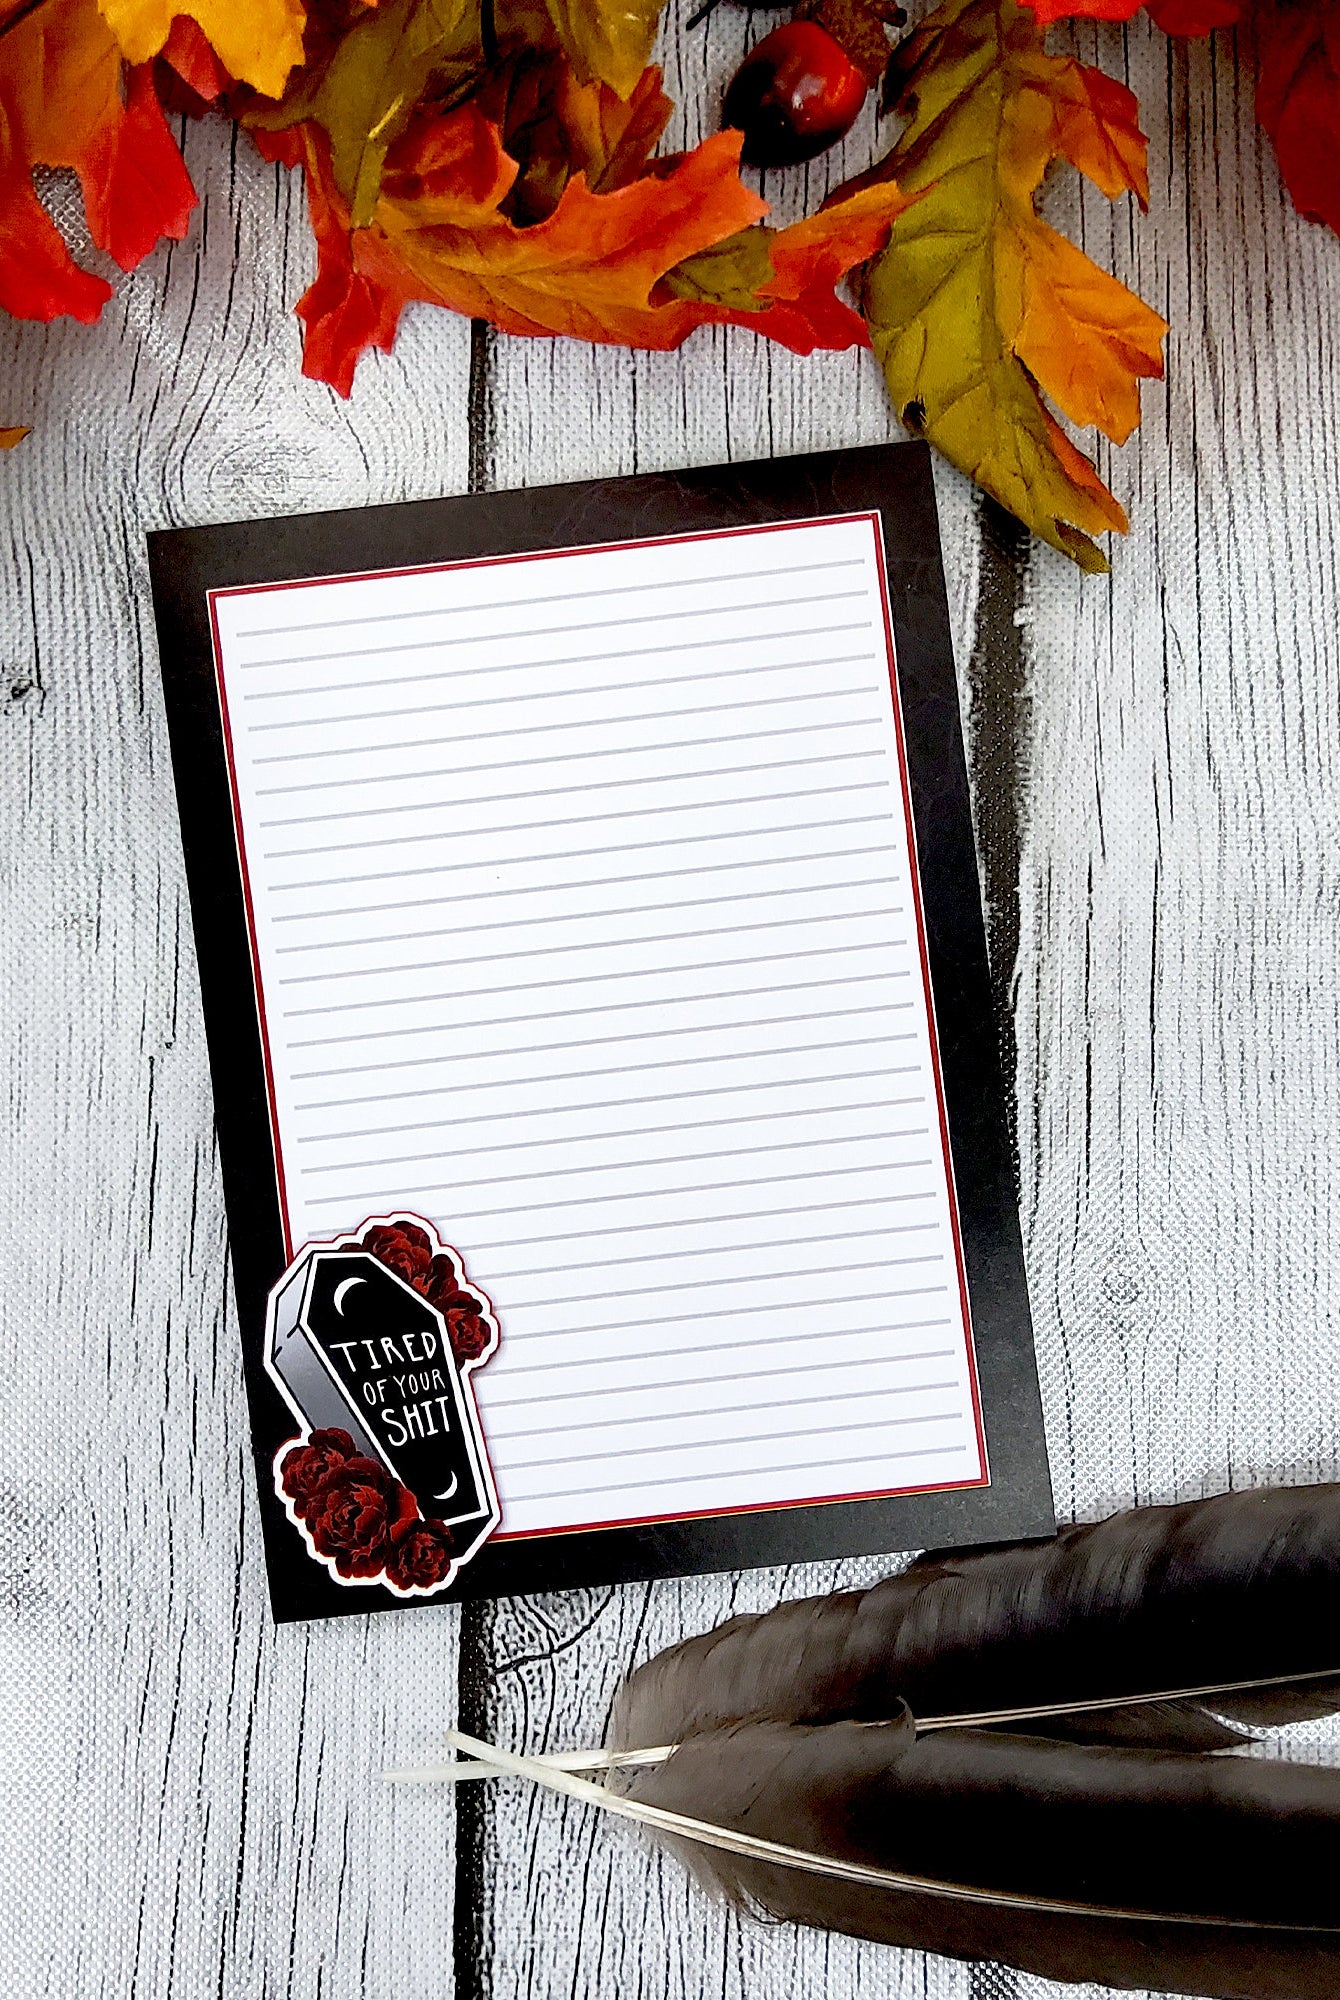 NOTEPAD: Tired of Your Shit Coffin Art , Tired of Your Shit Coffin , Tired of Your Shit Black and Red Notepad , Tired of Your Shit